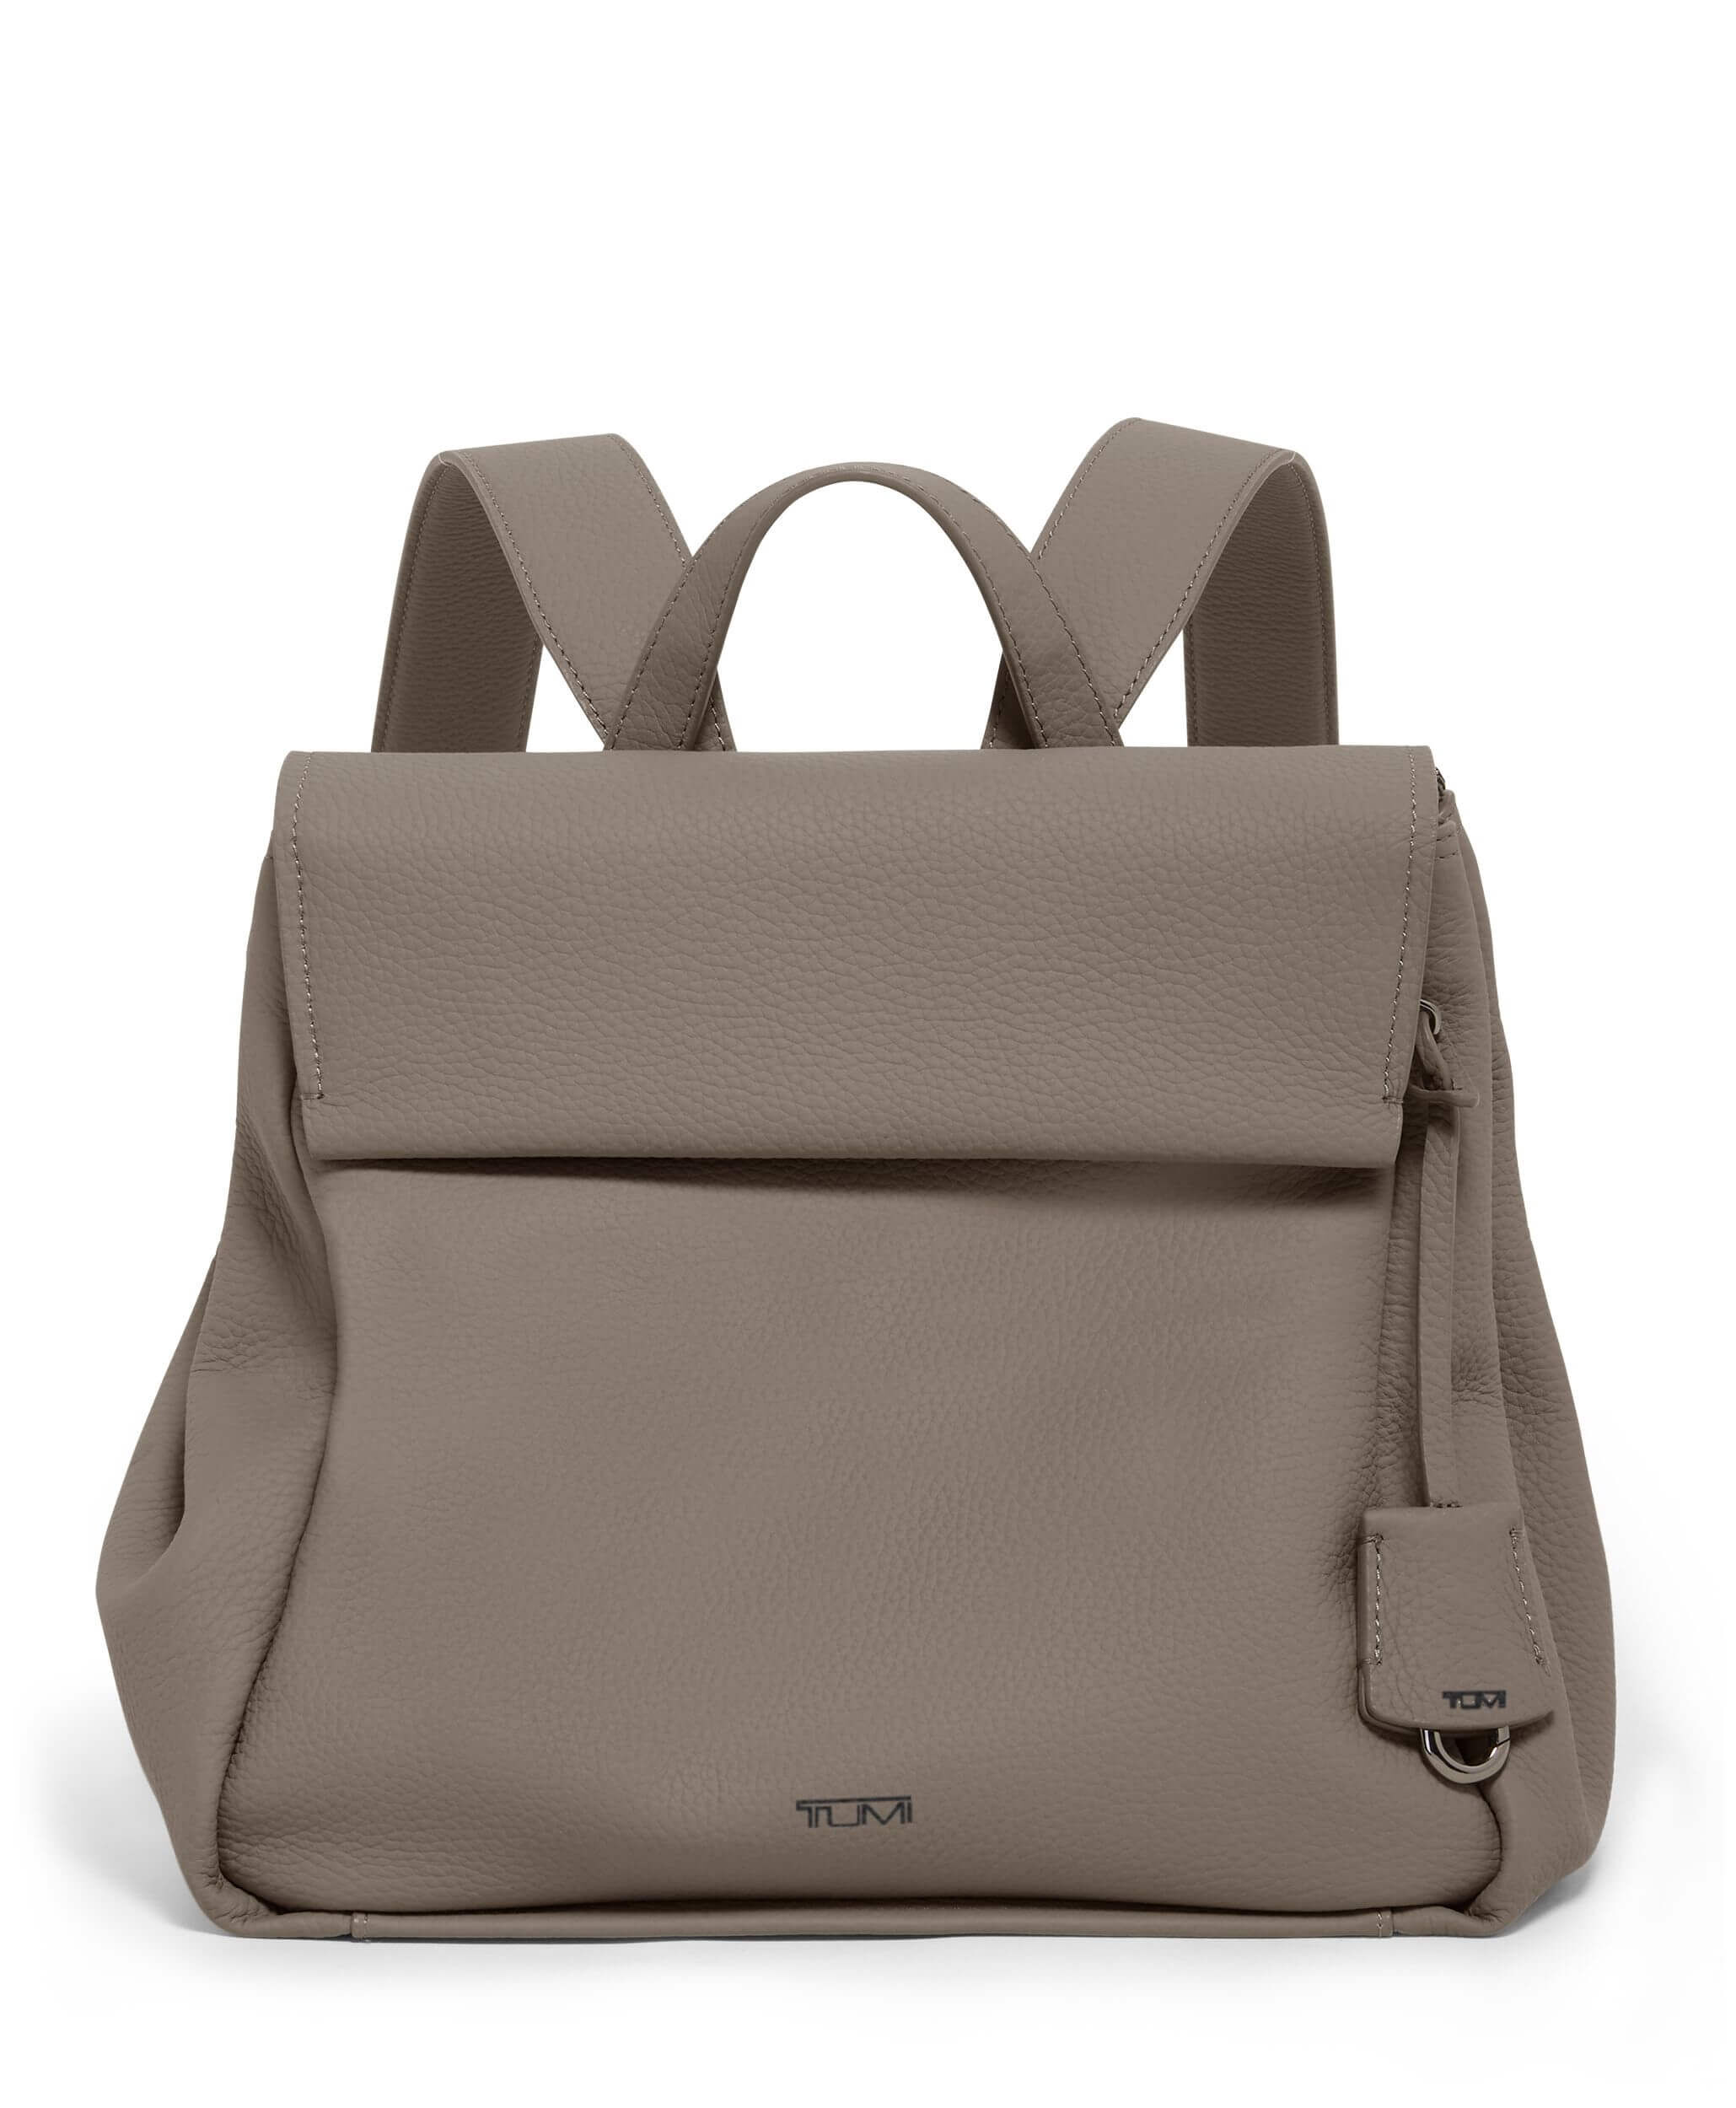 Tumi Voyageur Just in Case Packable Nylon Tote | Nordstrom